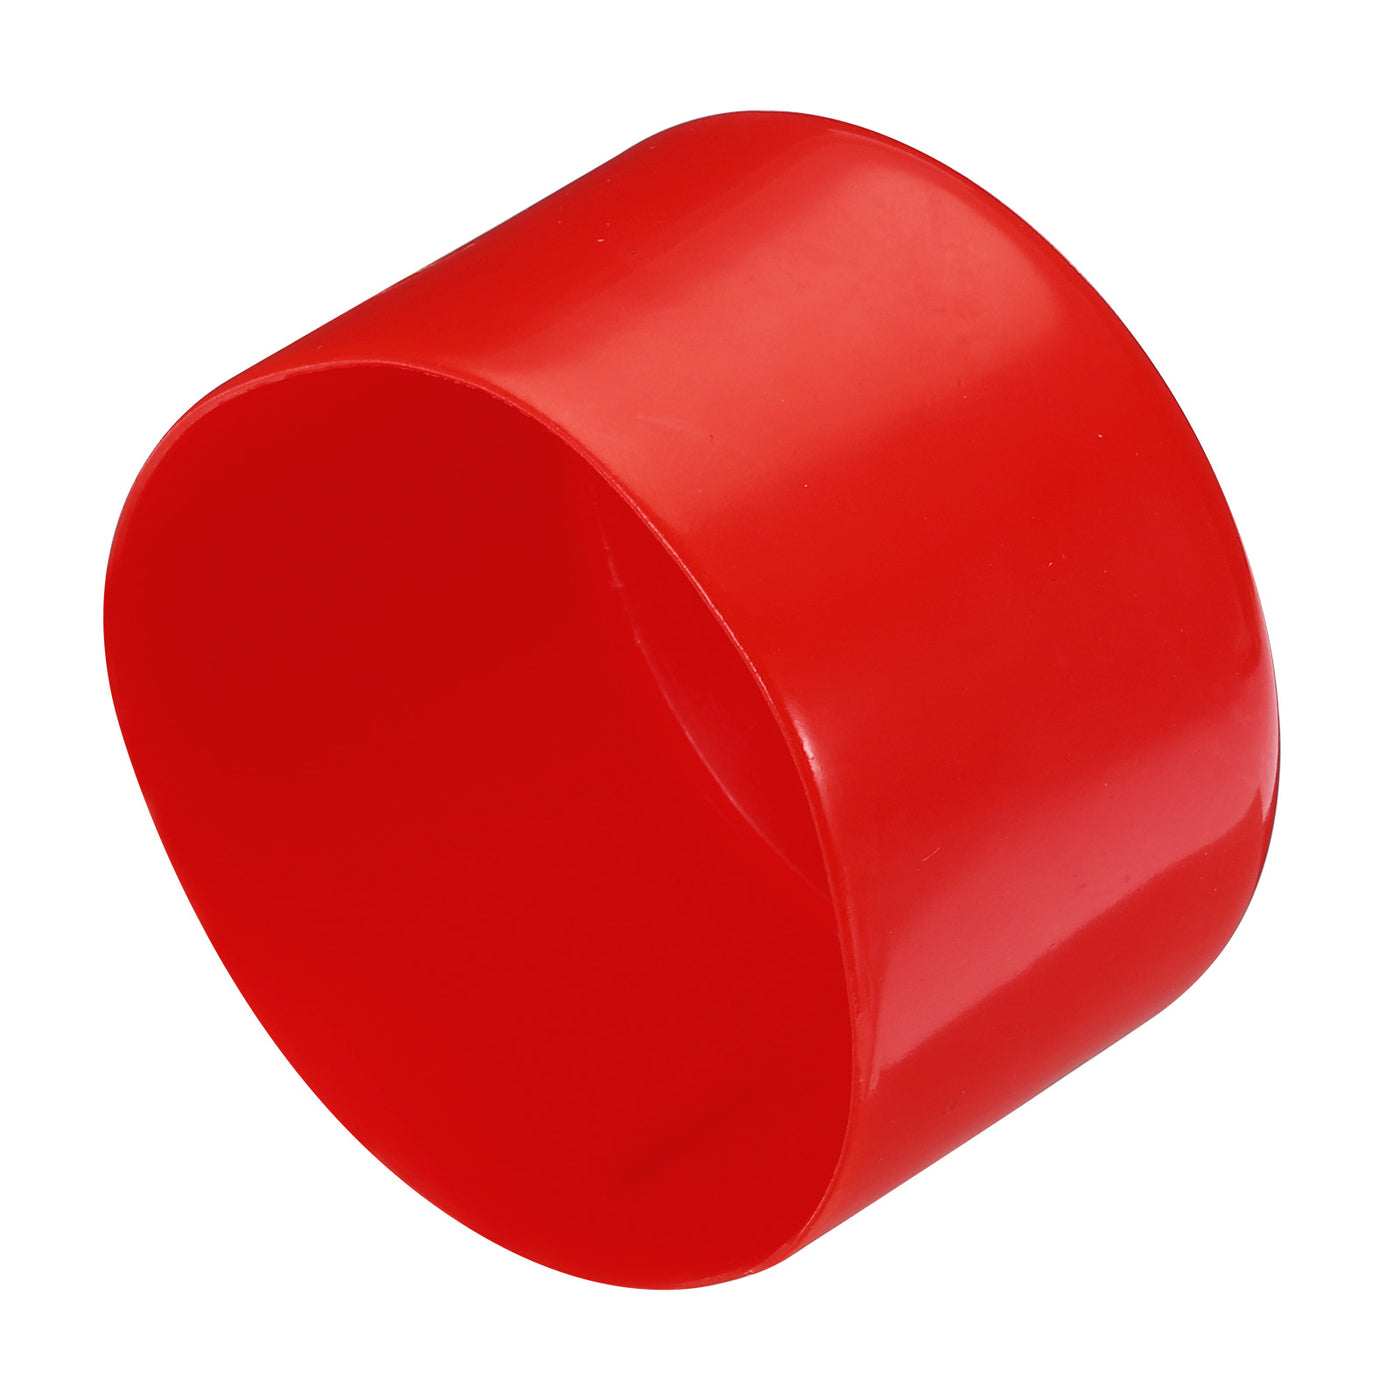 uxcell Uxcell Rubber End Caps 95mm ID Vinyl Round Tube Bolt Cap Cover Screw Thread Protectors Red